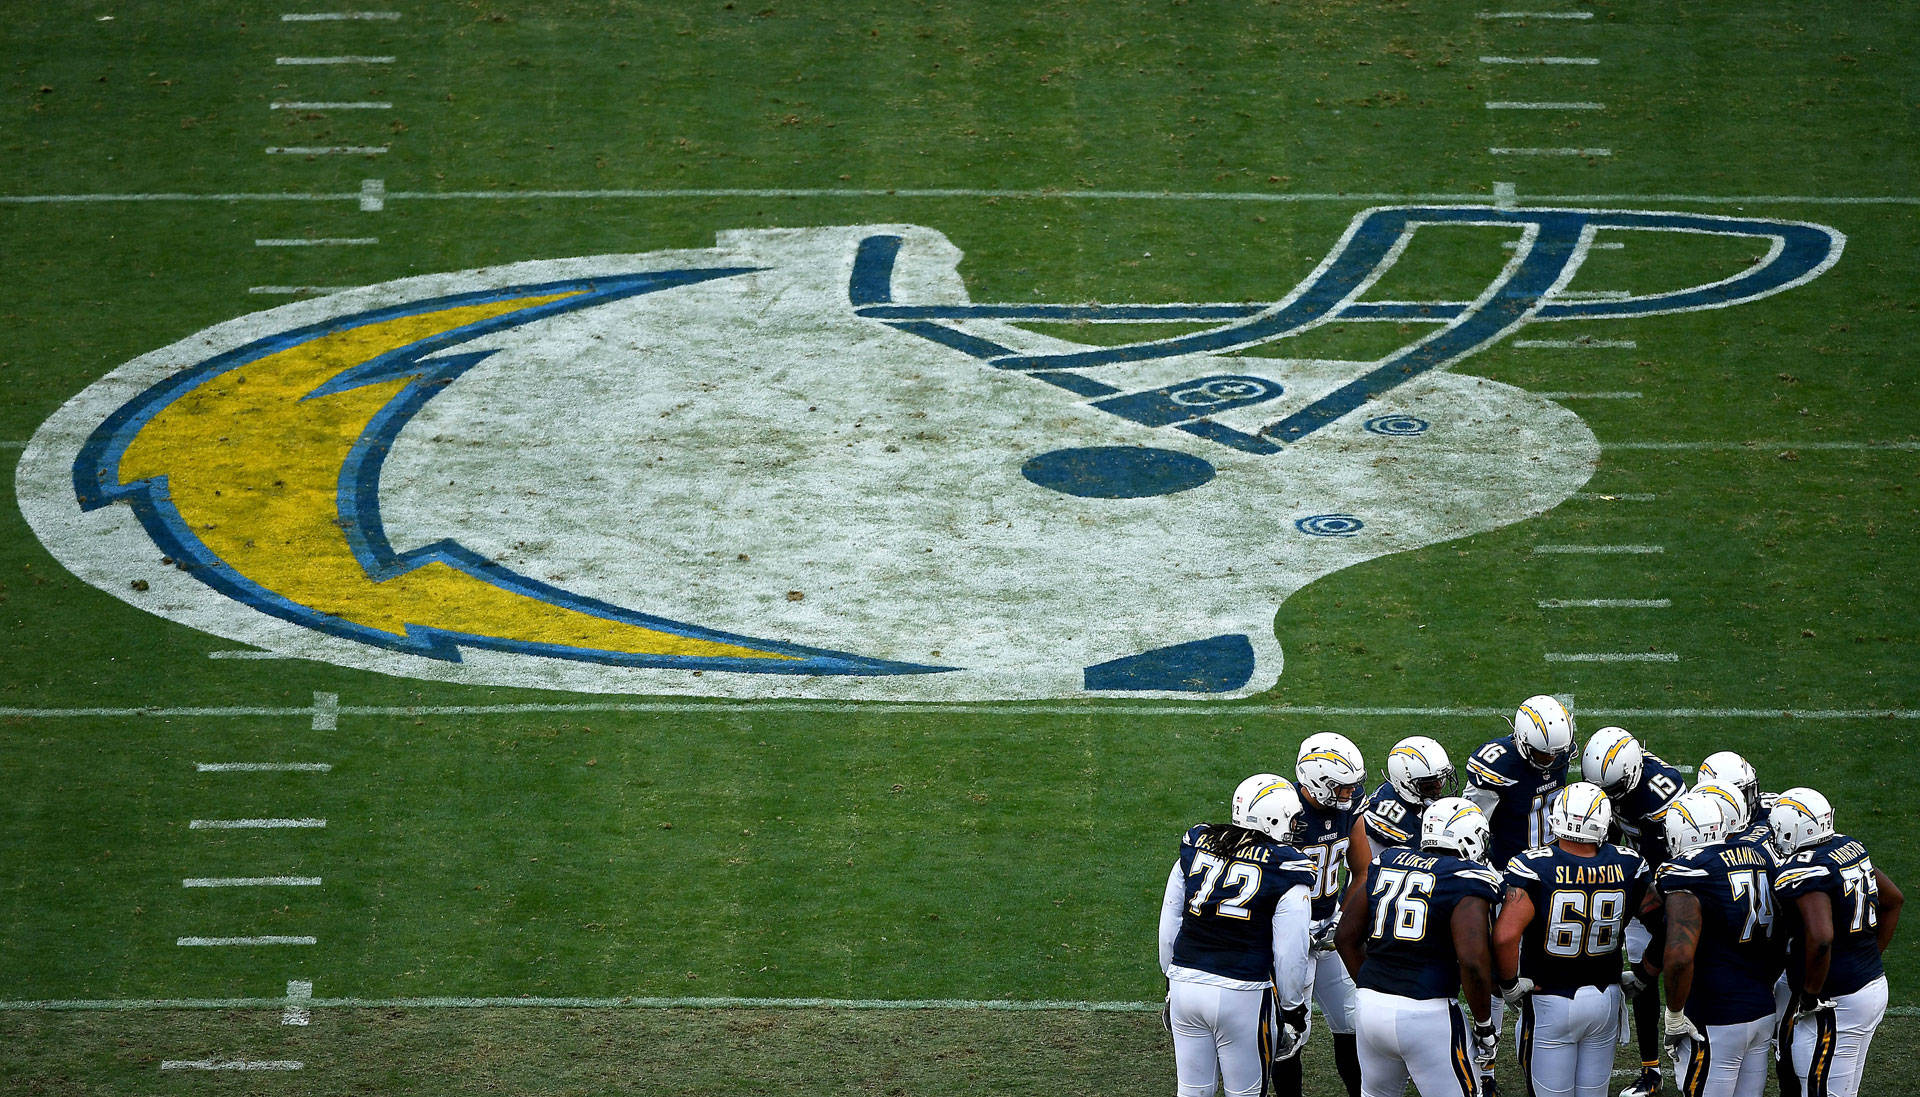 The Chargers have been in San Diego for 56 years. They will join the Rams in giving the nation's second-largest media market two NFL teams for the first time in decades. Donald Miralle/Getty Images